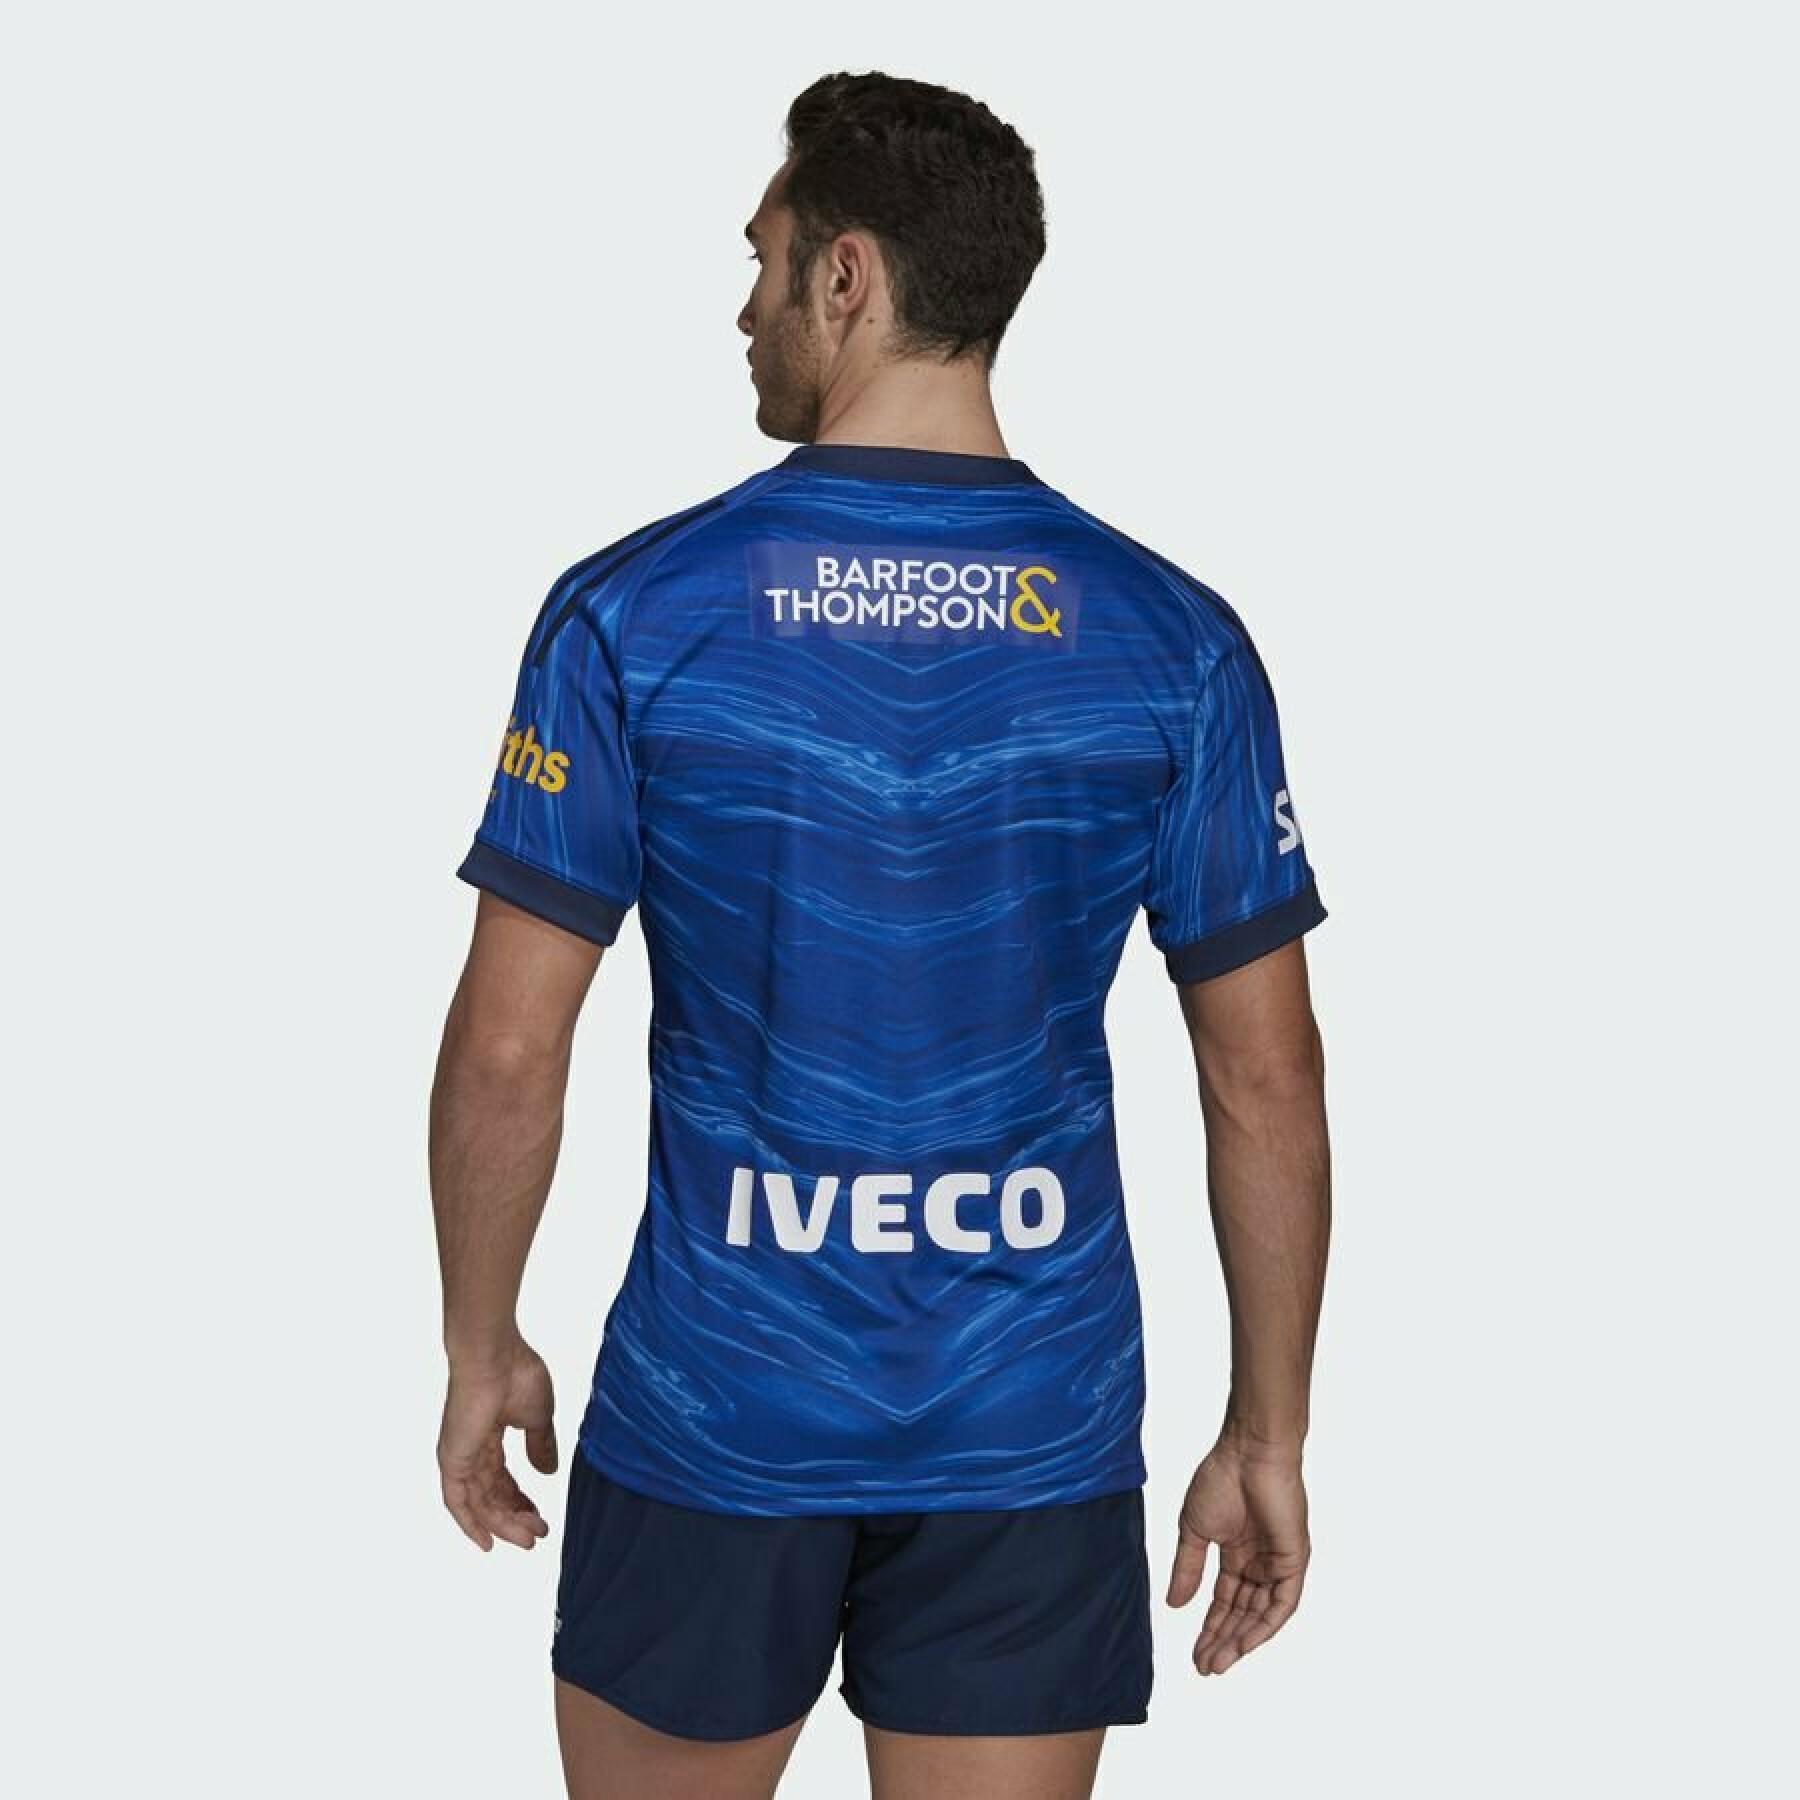 Home jersey Blues Rugby Replica 2021/22